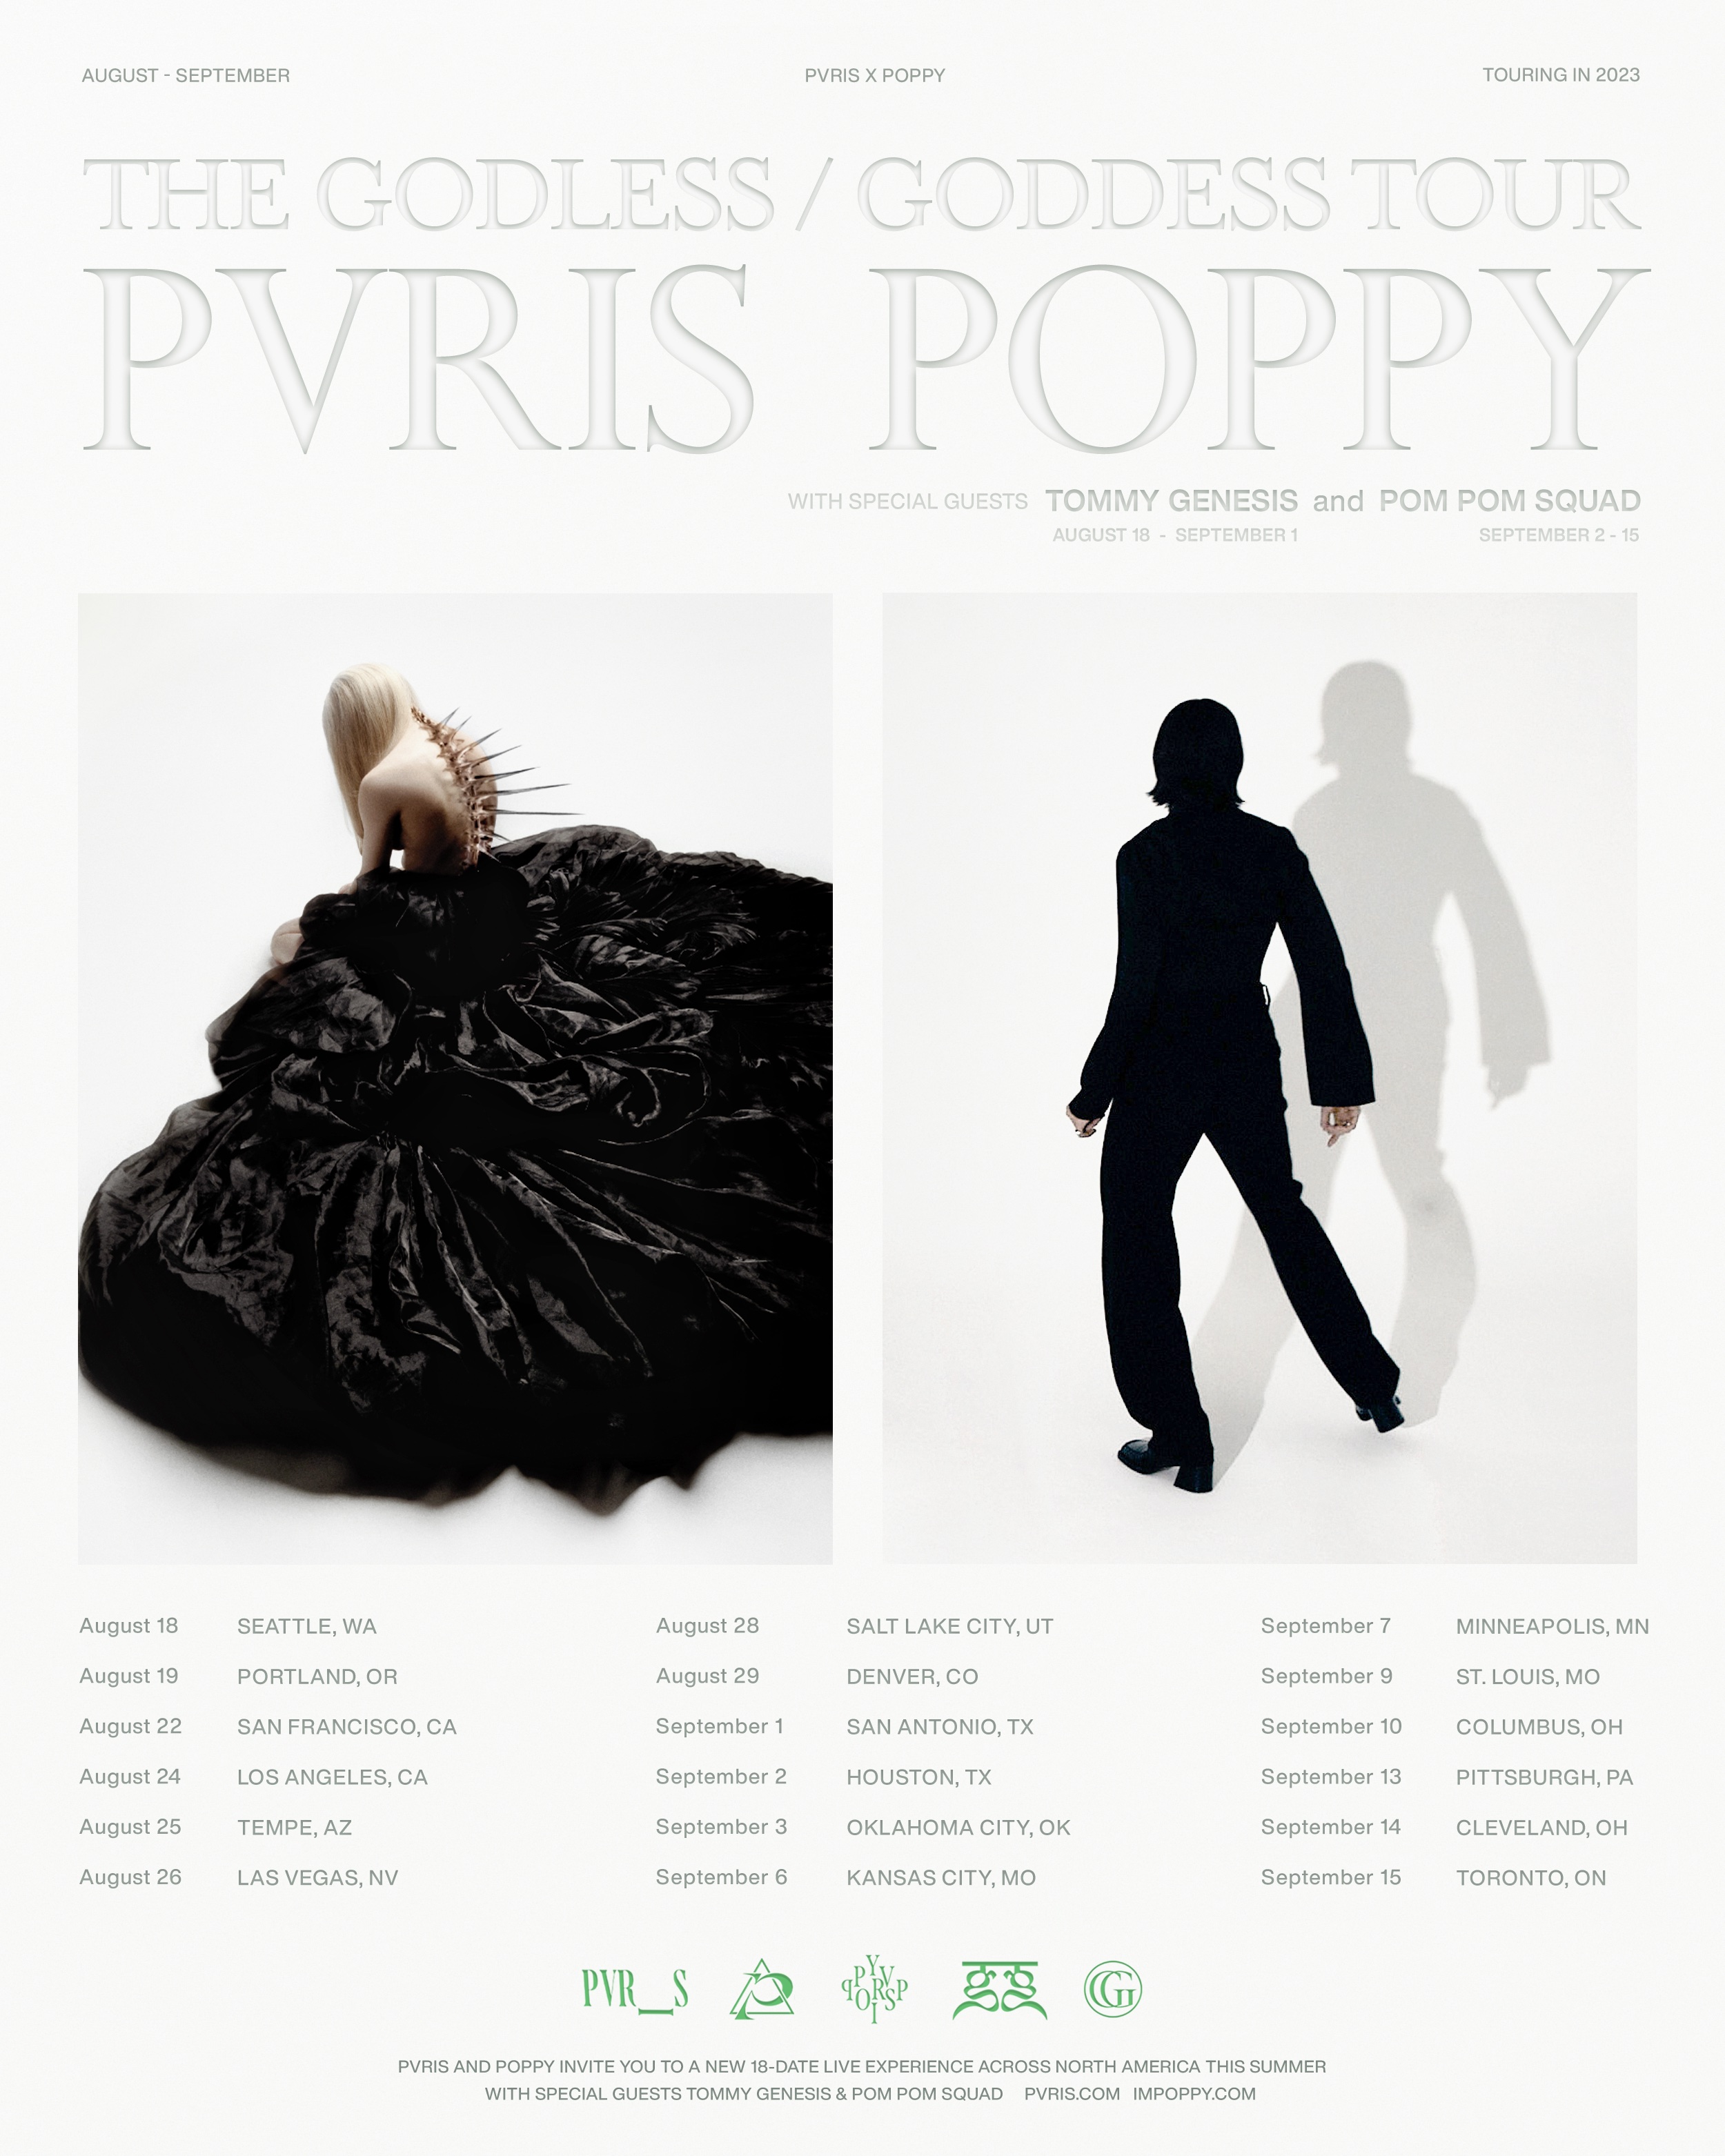 Poppy and PVRIS Tour 2023: Tickets, dates, venues, and more